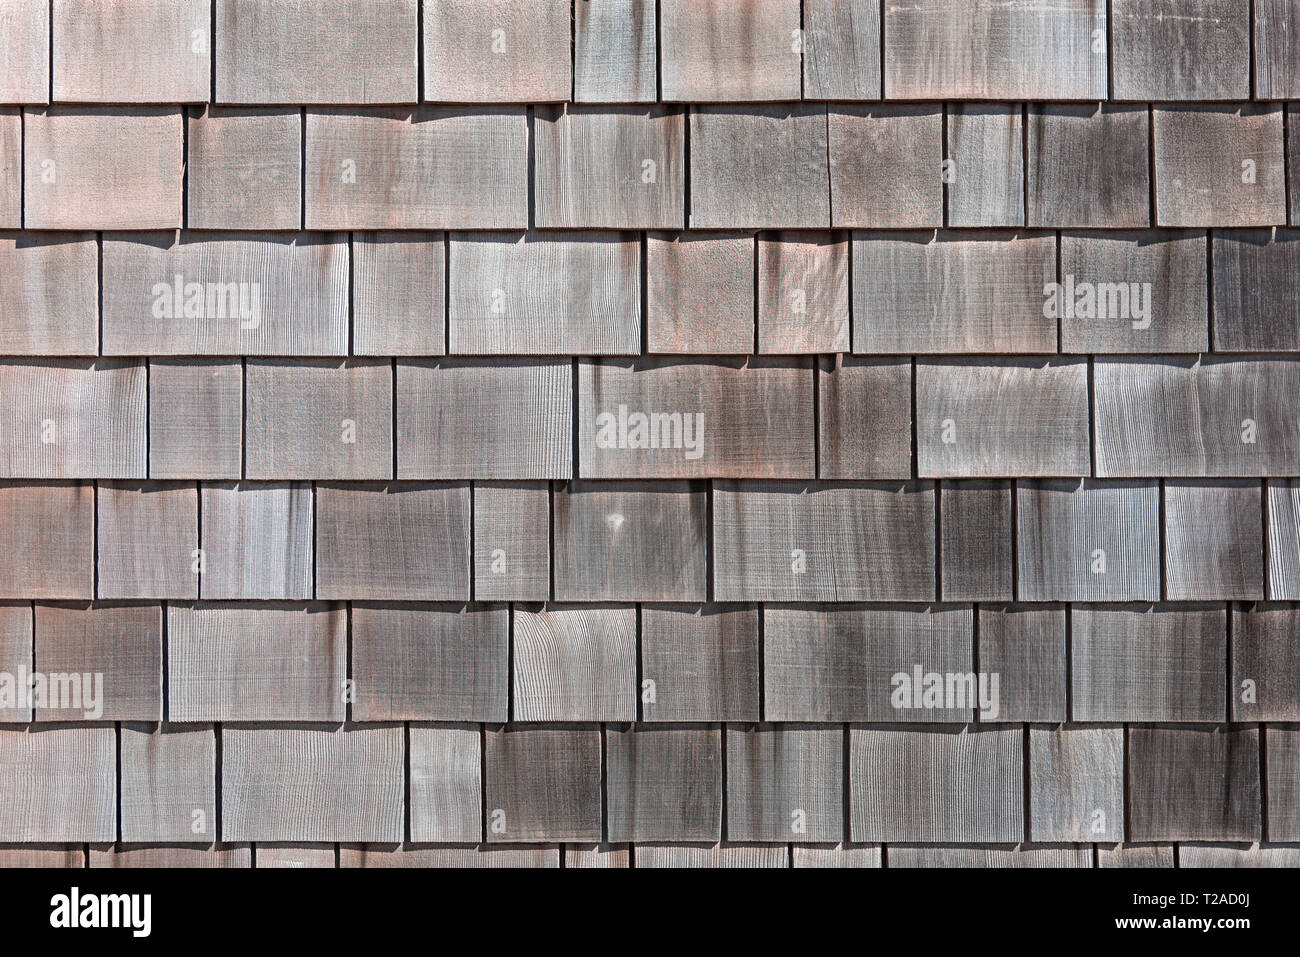 Wood shingle roof showing shingles and textures of roof. Stock Photo